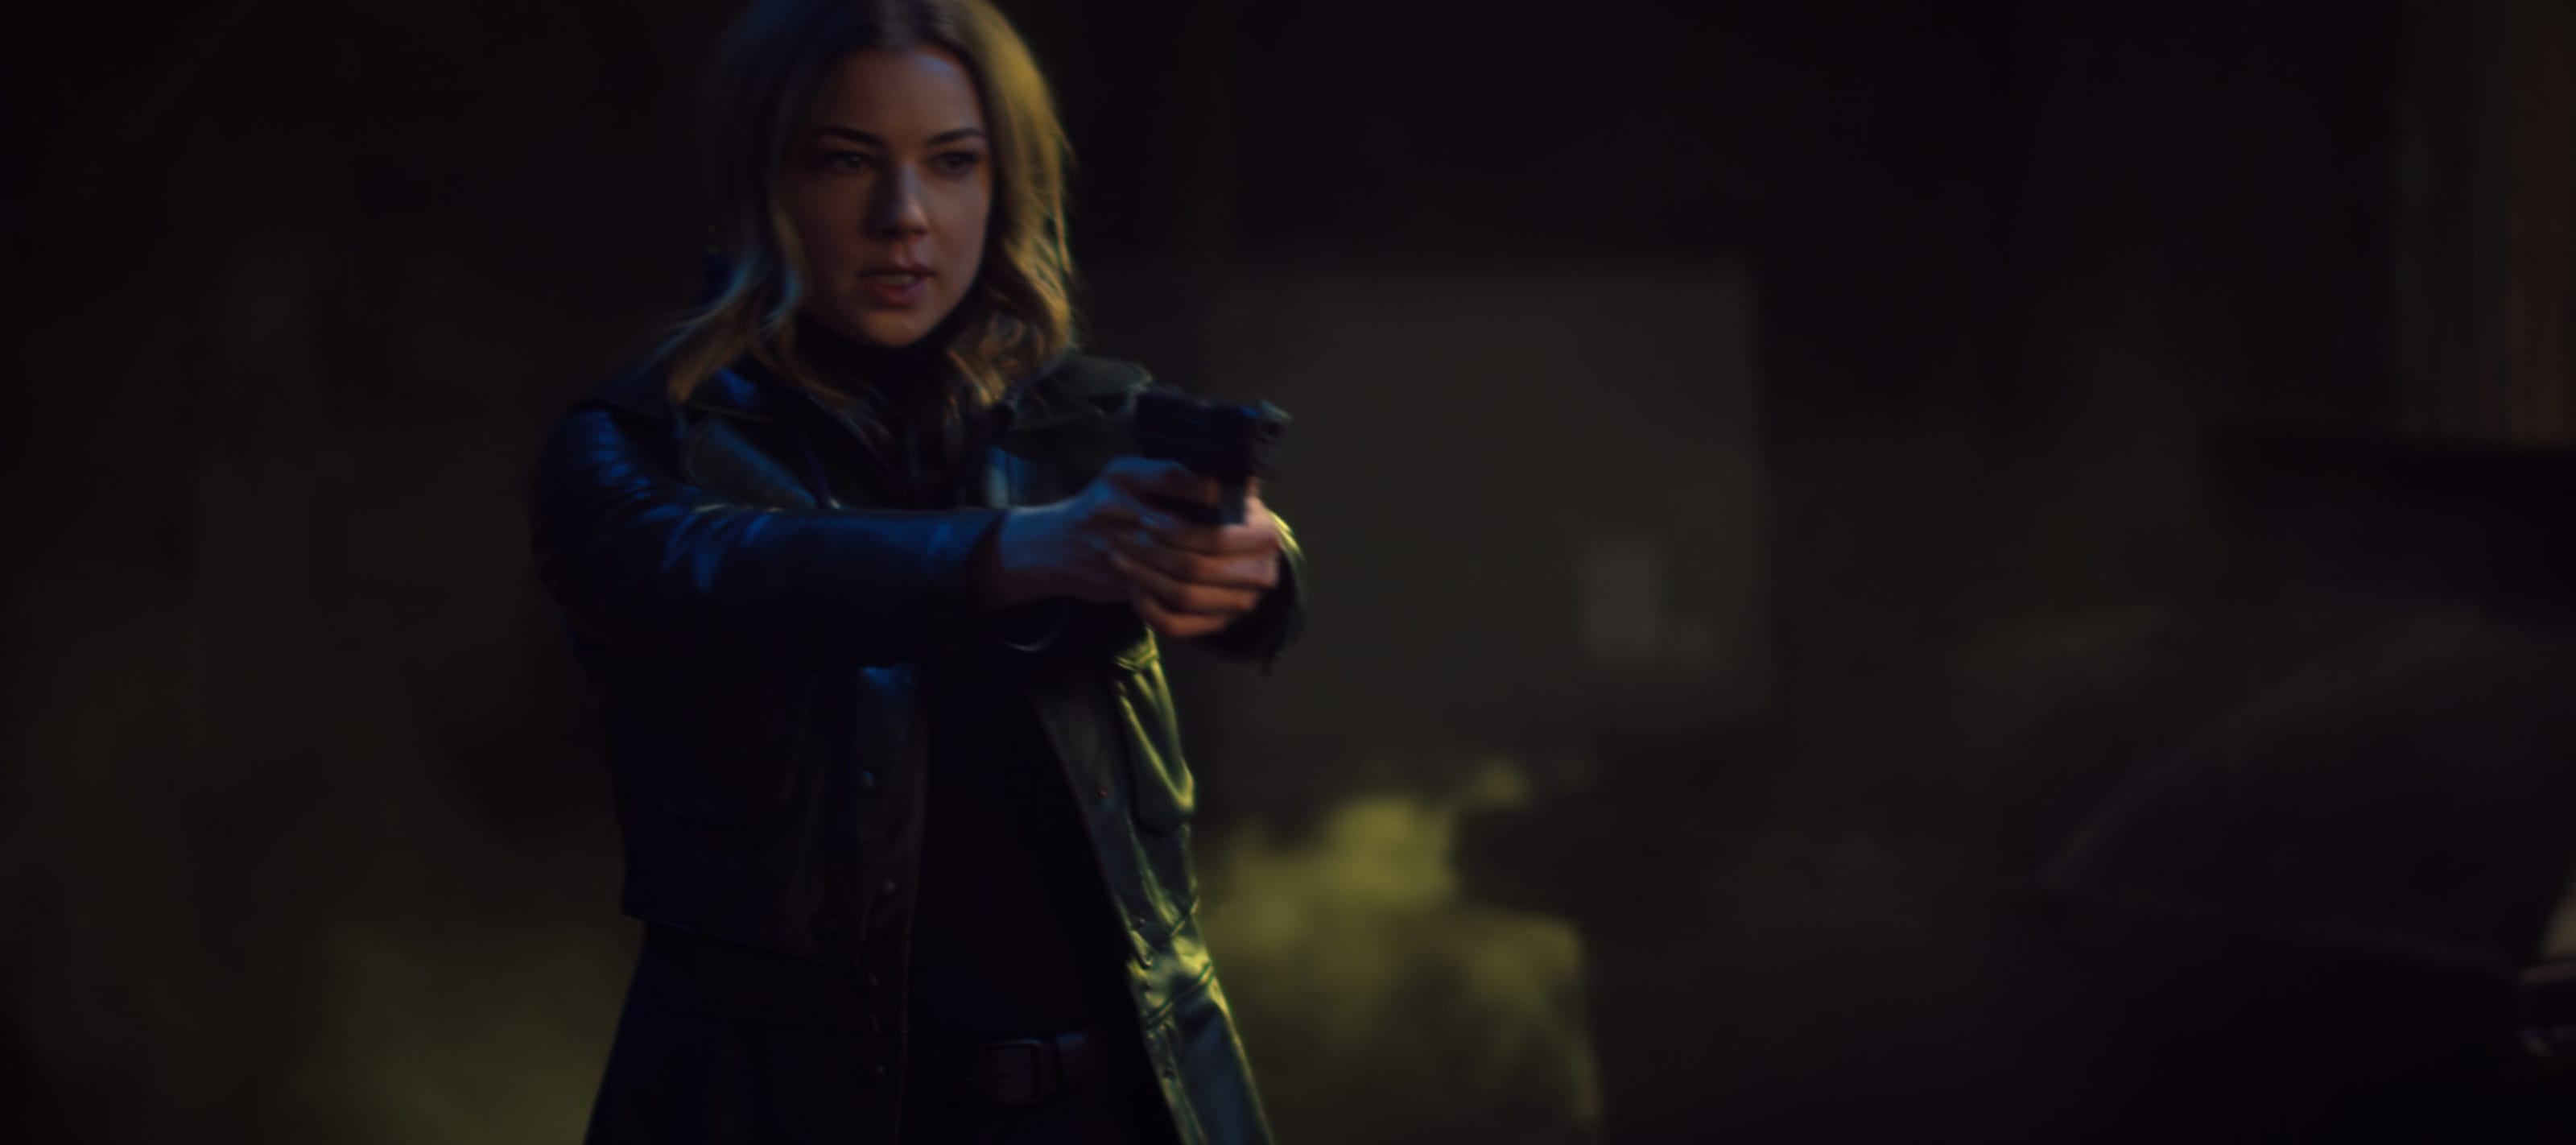 Sharon From The Falcon And The Winter Soldier Wallpapers